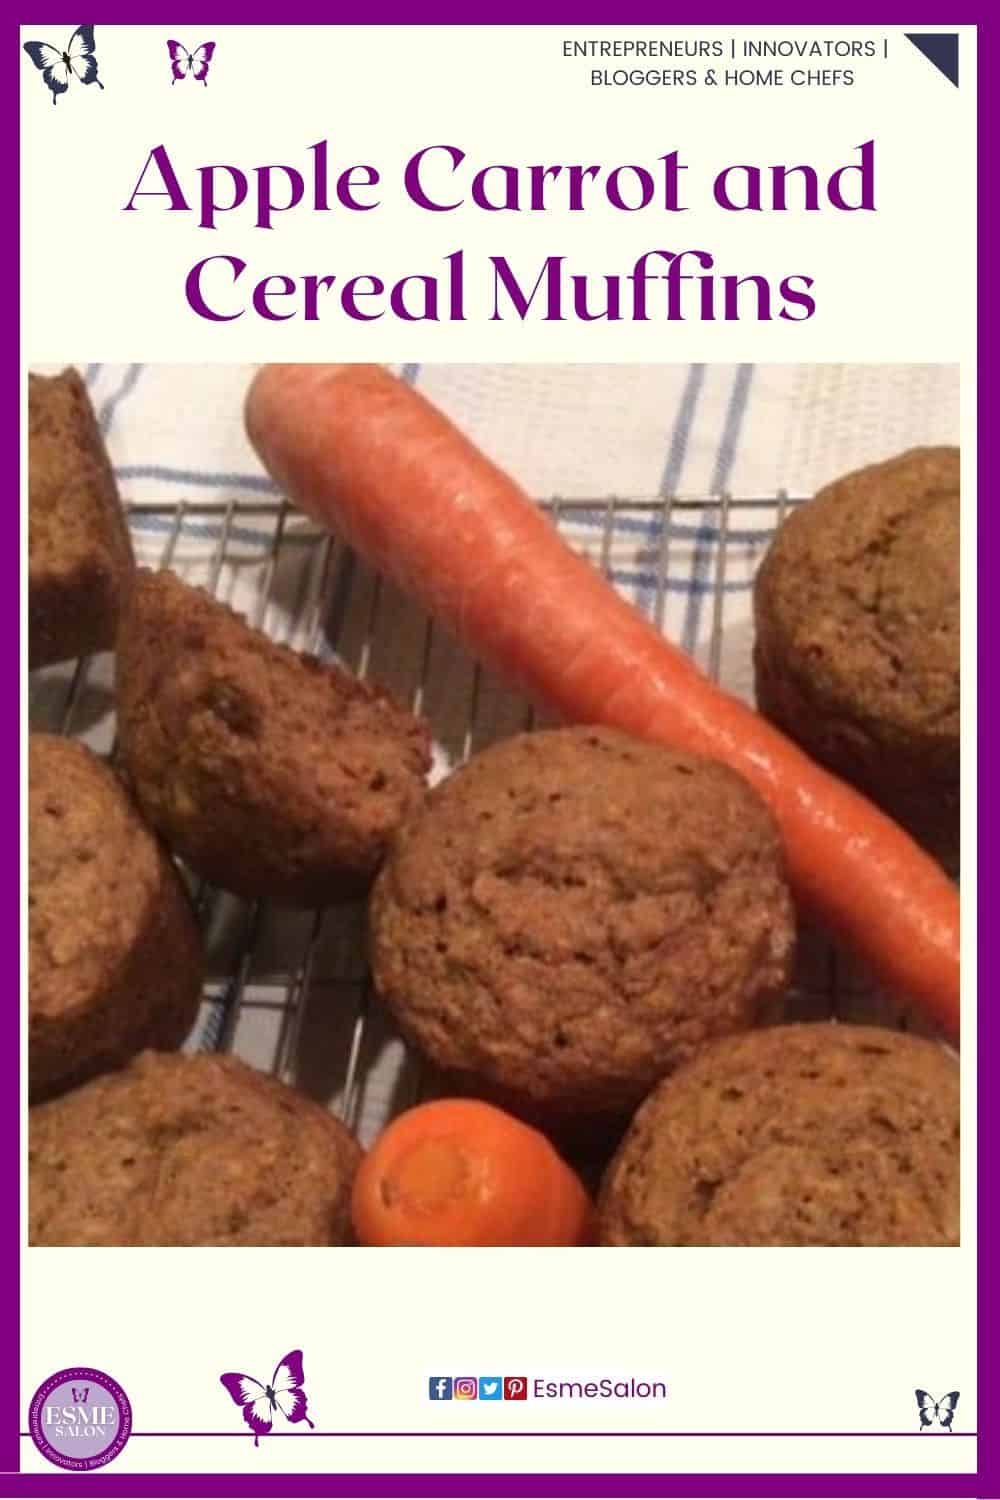 an image of Apple Carrot and Cereal Muffins with a raw carrot on the side